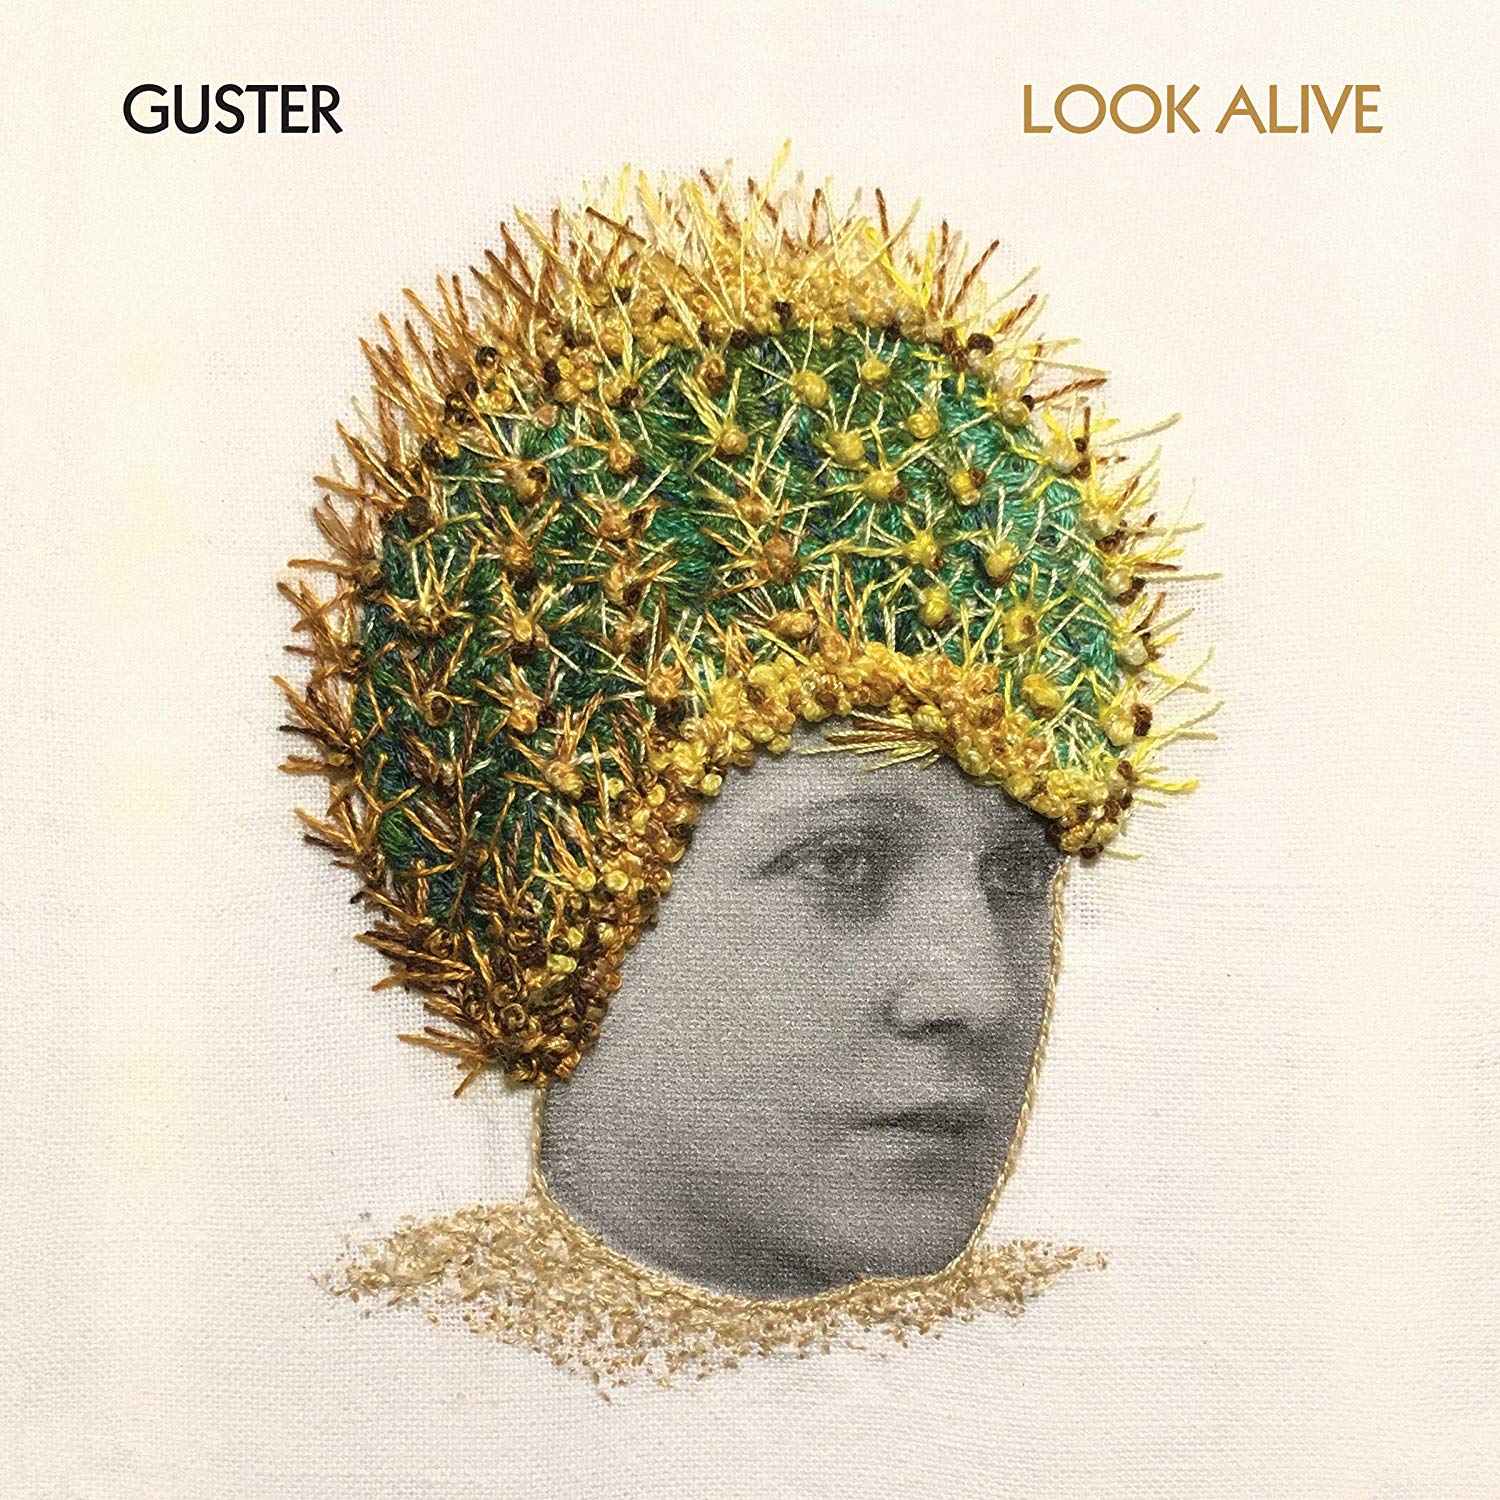 Guster - Look Alive vinyl cover